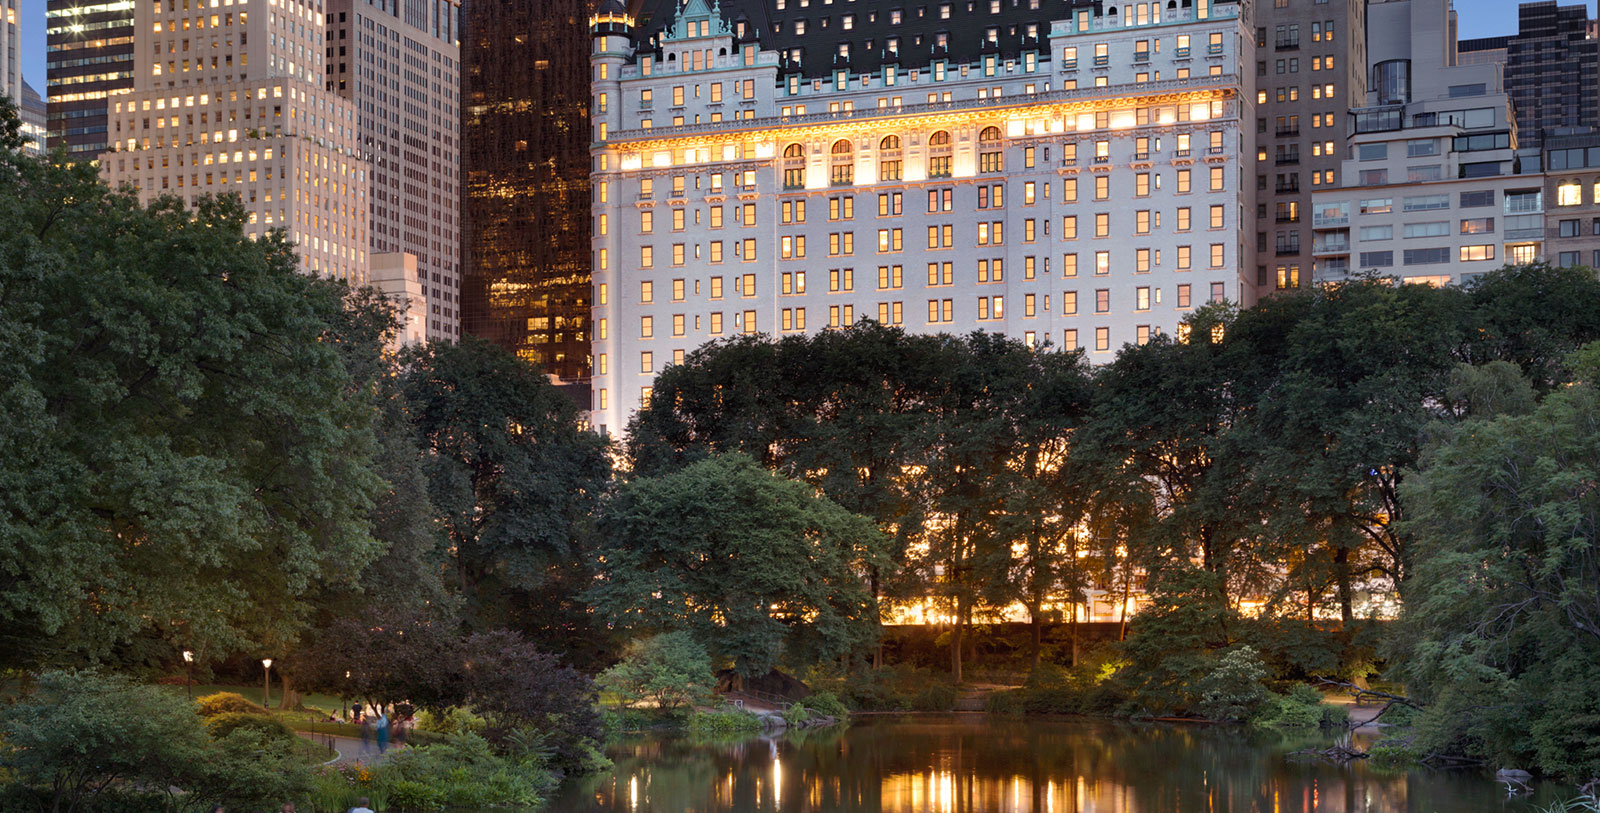 Explore the nature and culture in Central Park.